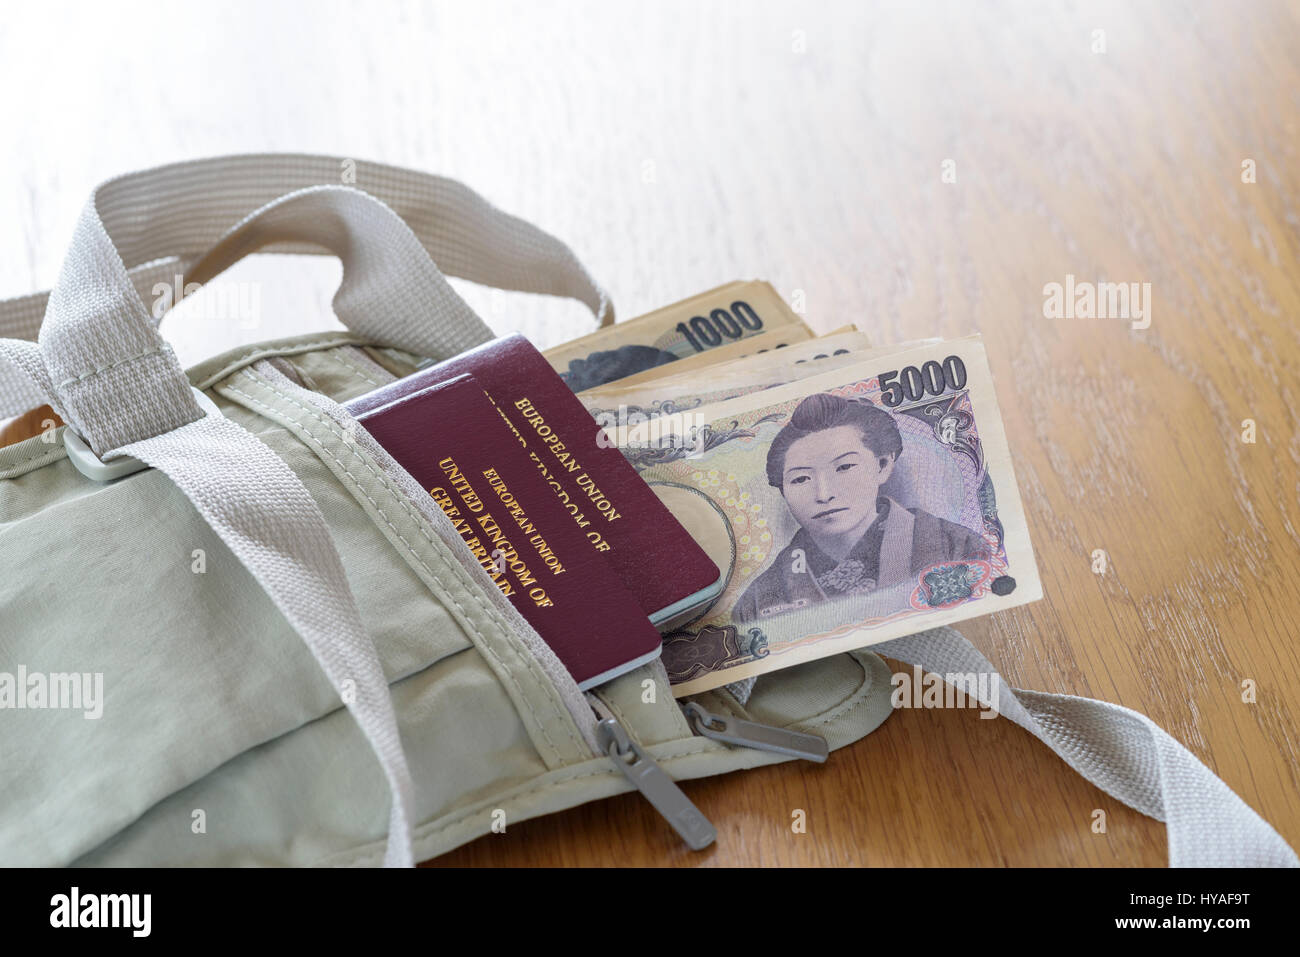 Shoulder holster money belt, with cash and passports.Japanese currency ,Yen, laid out on a table. Stock Photo